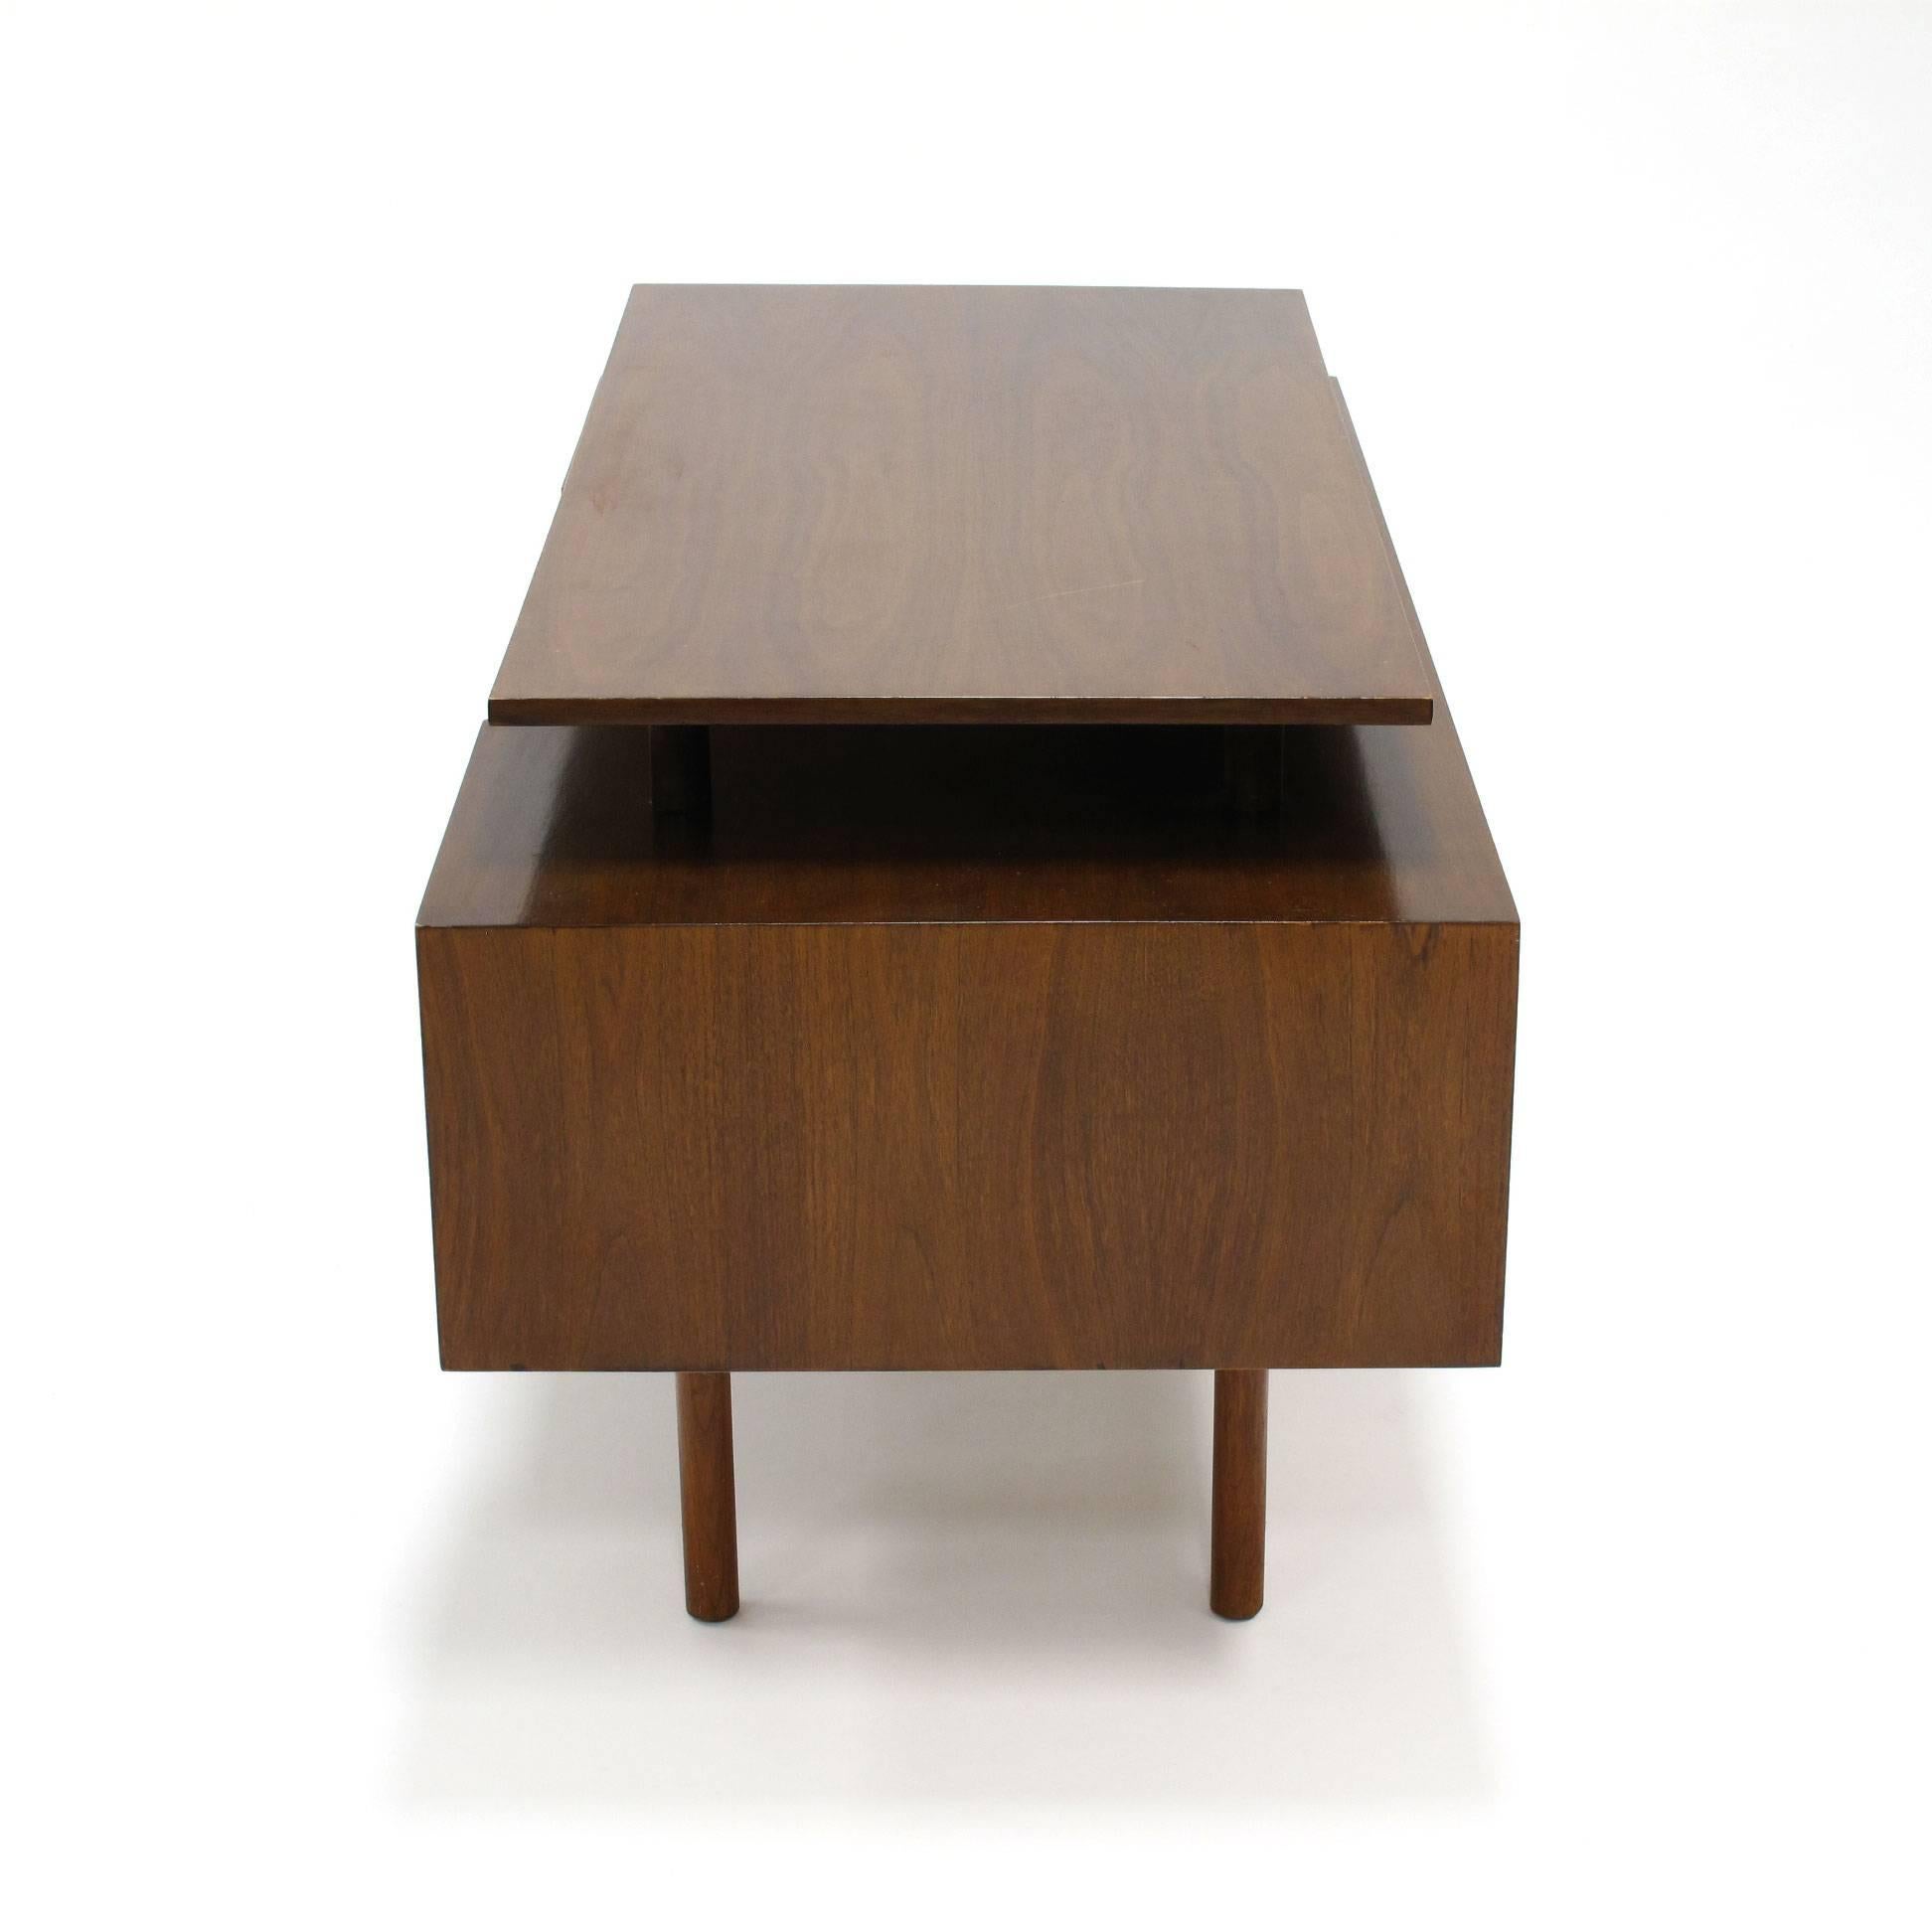 20th Century Milo Baughman Executive Desk with Floating Top, Glenn of California, 1950s For Sale